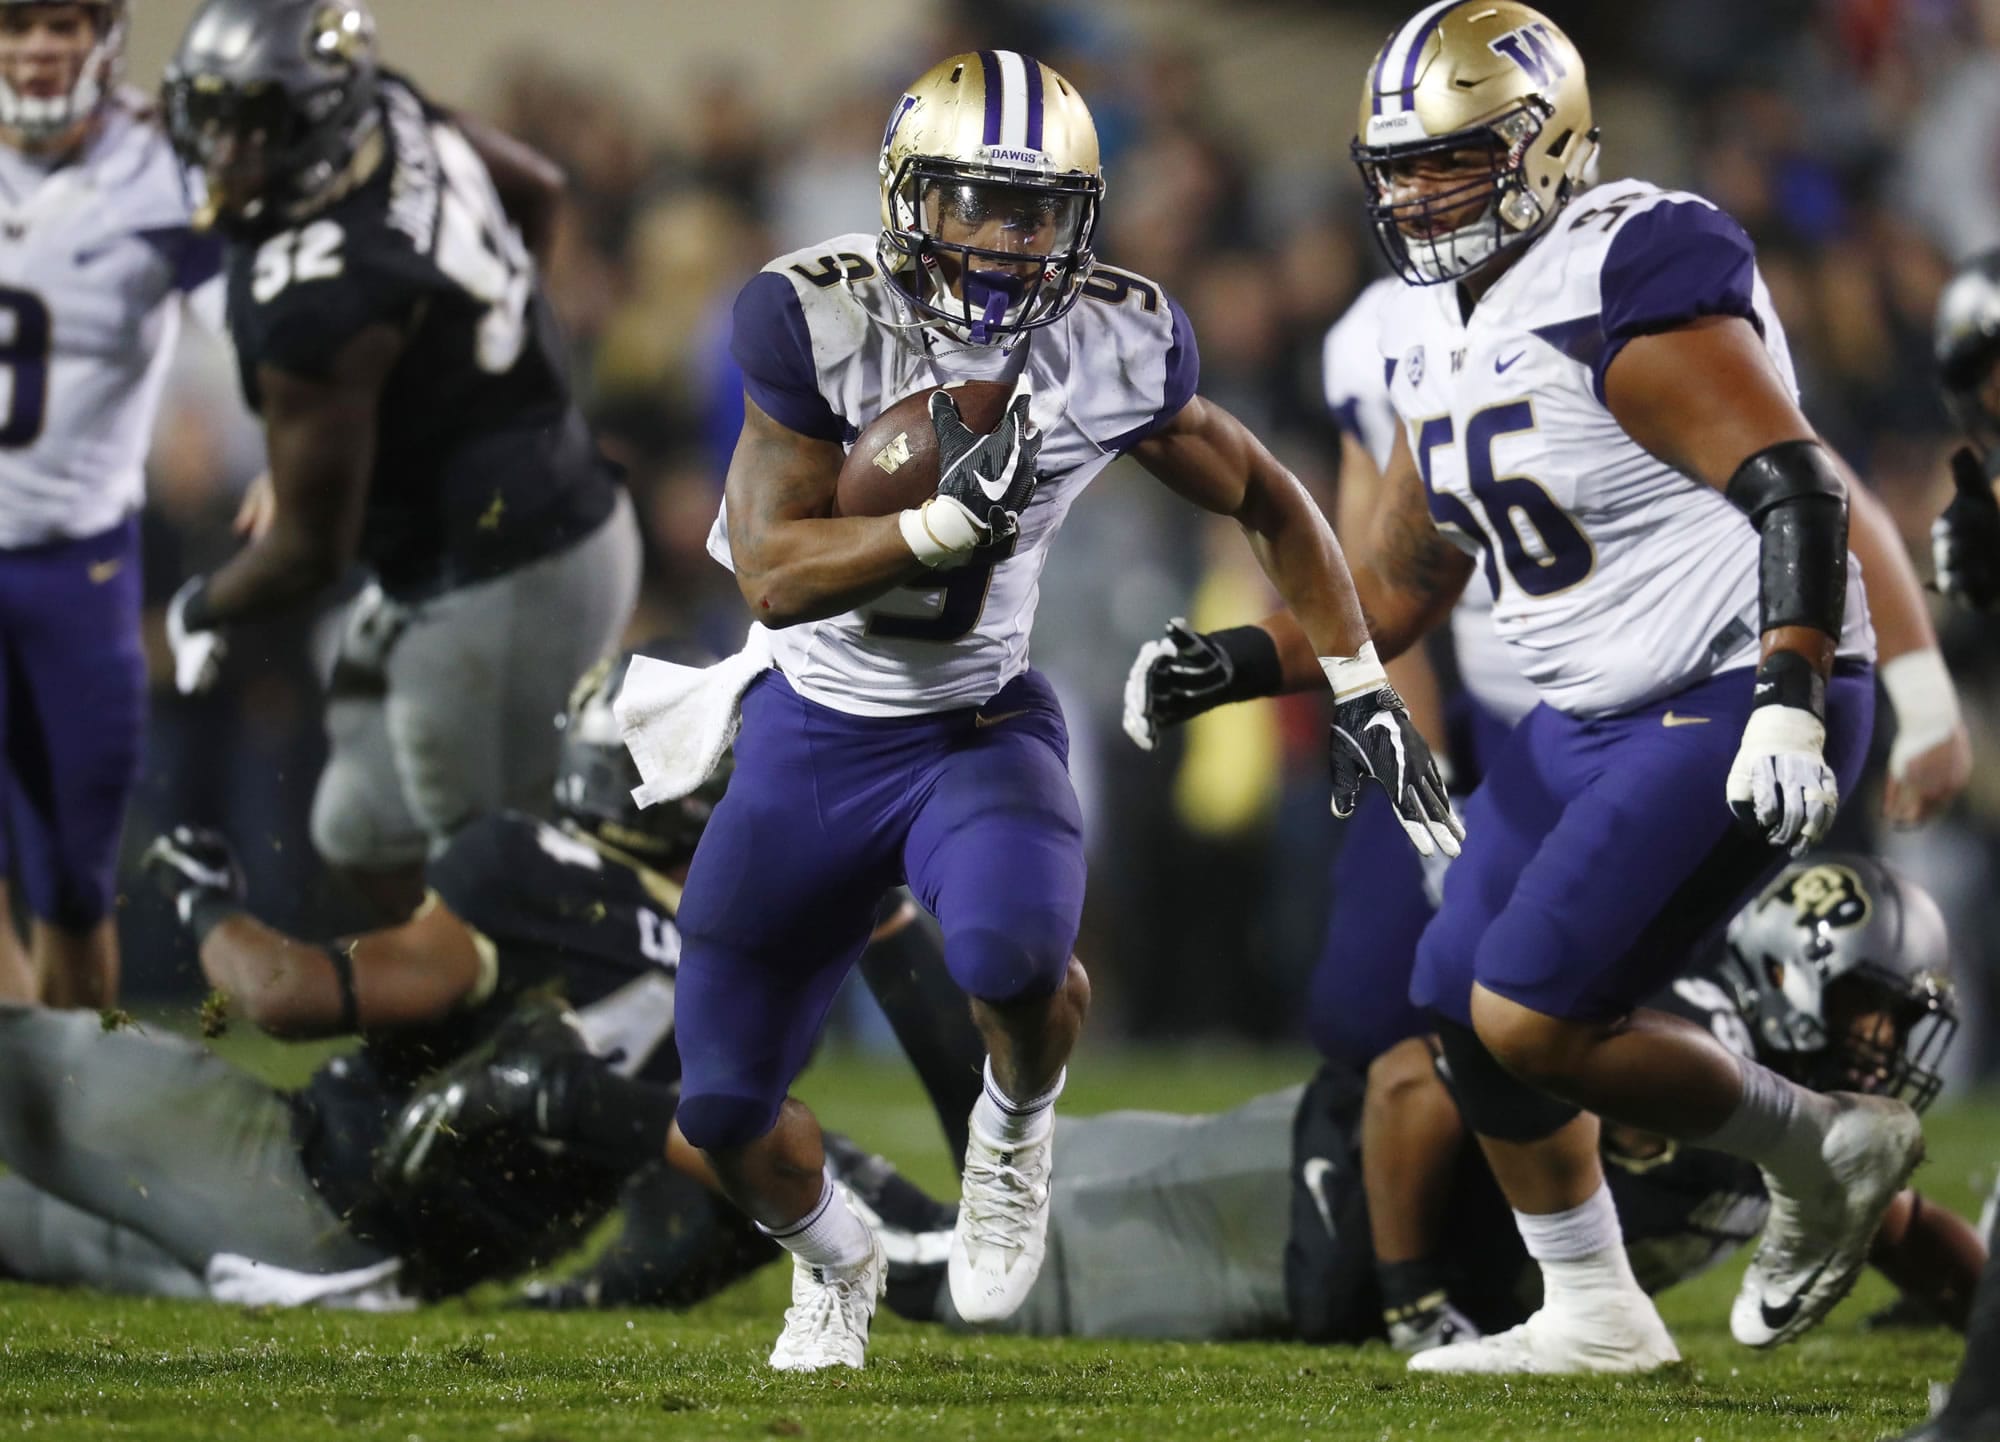 Washington running back Myles Gaskin carries for a long gain against Colorado during the second half of an NCAA college football game Saturday, Sept. 23, 2017, in Boulder, Colo. Washington won 37-10.